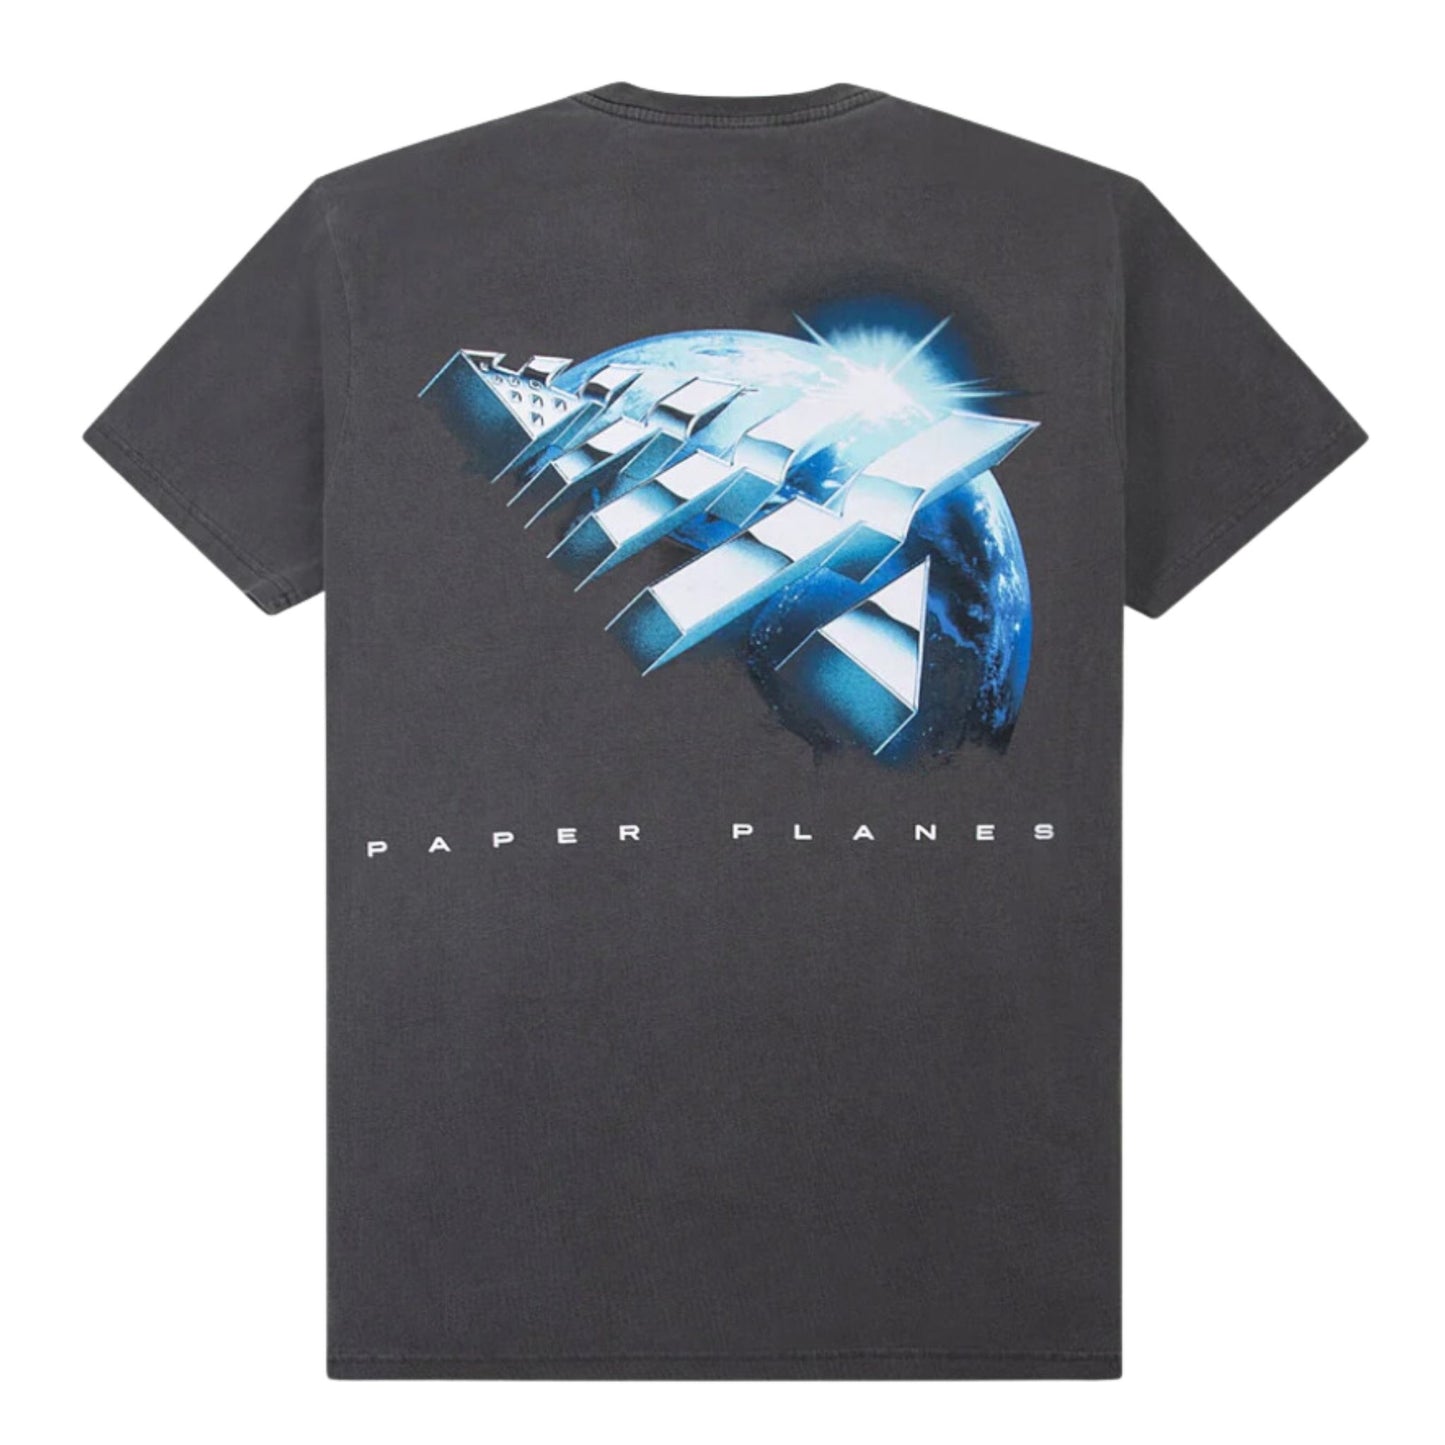 PAPER PLANES DIMENSIONAL TEE